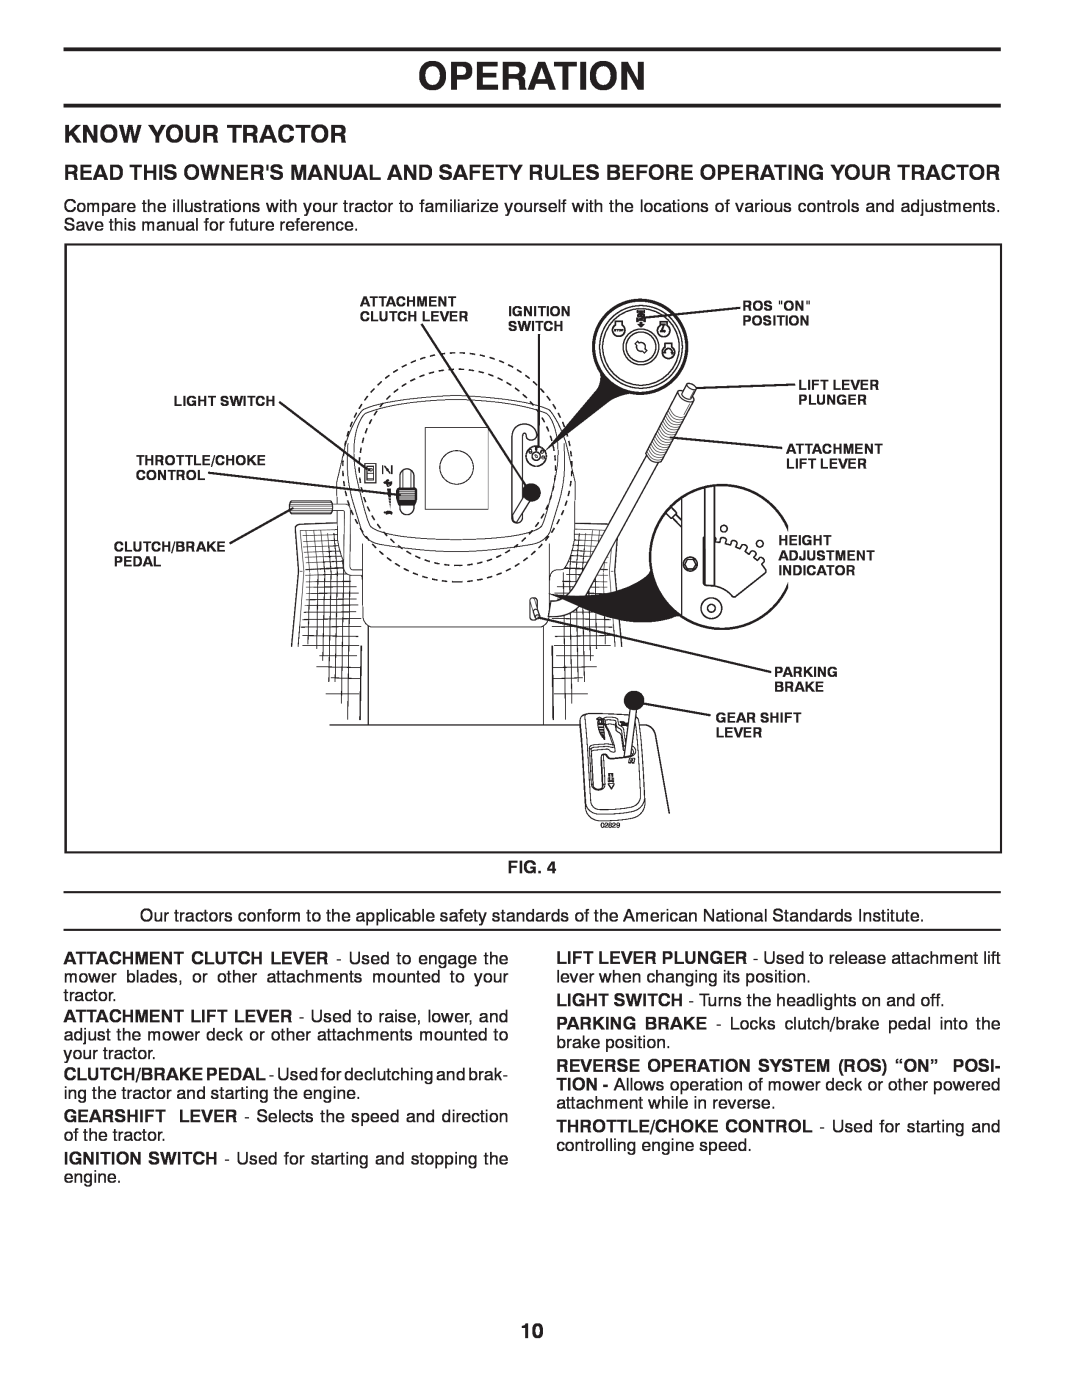 Poulan 425001 manual Know Your Tractor, Operation 